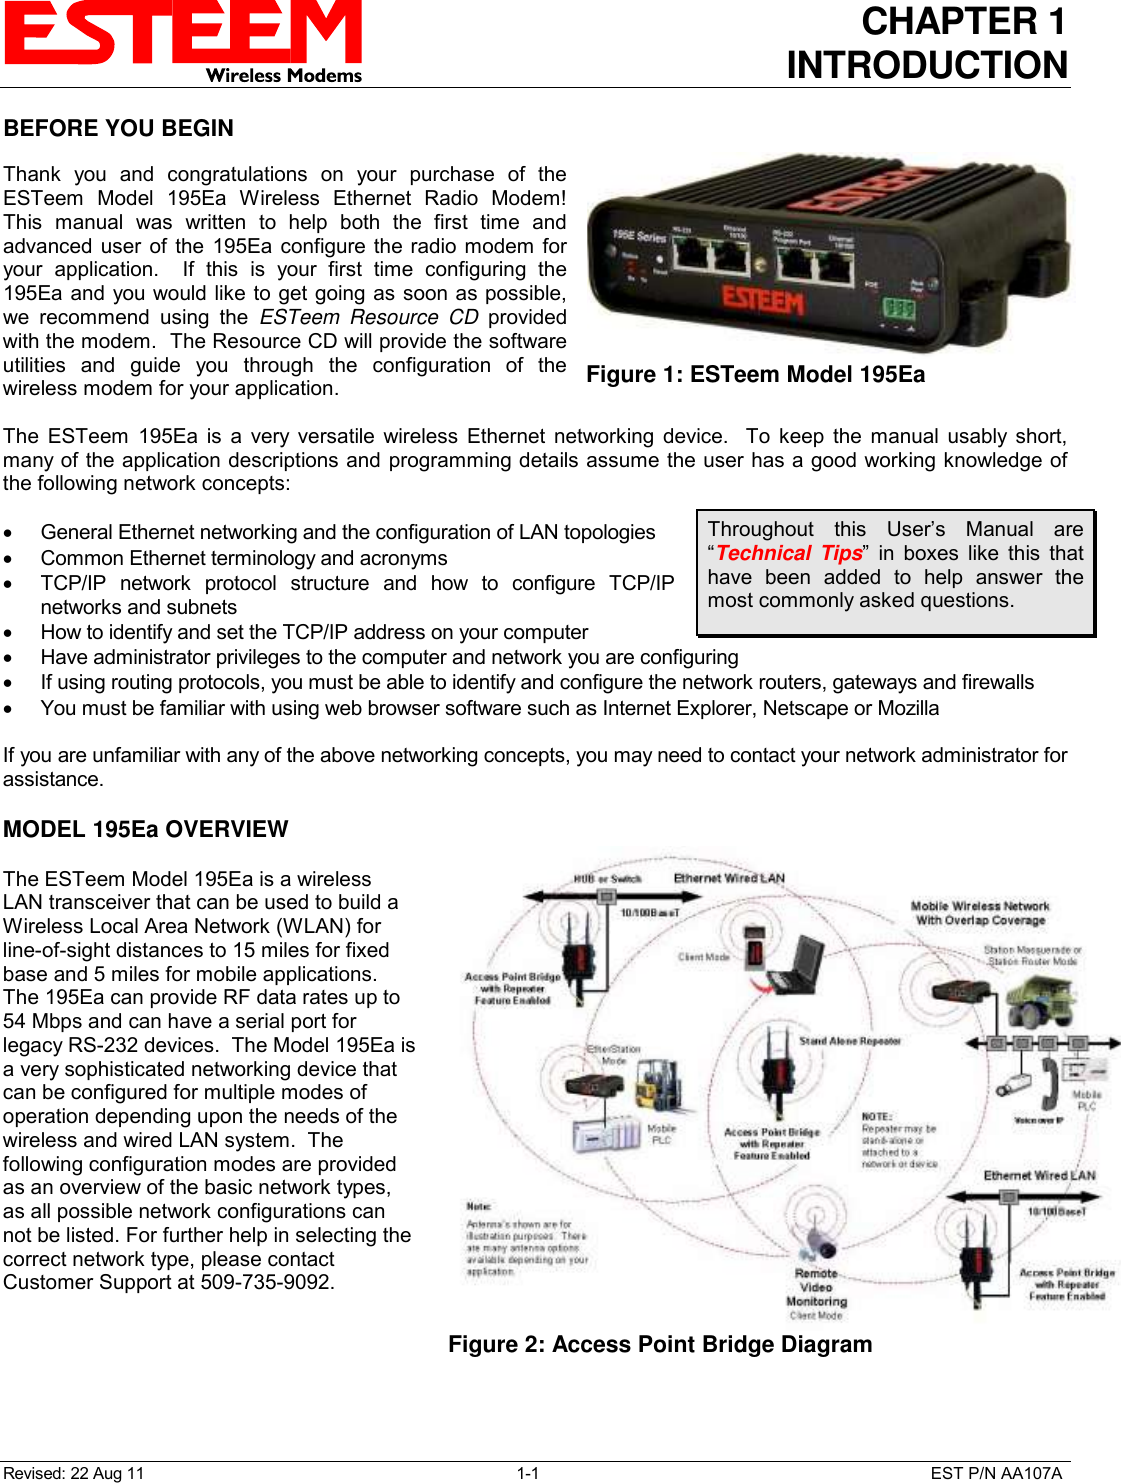 CHAPTER 1 INTRODUCTION  Revised: 22 Aug 11  1-1  EST P/N AA107A BEFORE YOU BEGIN  Thank  you  and  congratulations  on  your  purchase  of  the ESTeem  Model  195Ea  Wireless  Ethernet  Radio  Modem!  This  manual  was  written  to  help  both  the  first  time  and advanced user  of the  195Ea configure the radio modem for your  application.    If  this  is  your  first  time  configuring  the 195Ea and you would like to get going as soon as possible, we  recommend  using  the  ESTeem  Resource  CD  provided with the modem.  The Resource CD will provide the software utilities  and  guide  you  through  the  configuration  of  the wireless modem for your application.  The  ESTeem  195Ea  is  a  very  versatile  wireless  Ethernet  networking  device.    To  keep  the  manual  usably  short, many of the application descriptions and programming details assume the user has a good working knowledge of the following network concepts:    General Ethernet networking and the configuration of LAN topologies    Common Ethernet terminology and acronyms   TCP/IP  network  protocol  structure  and  how  to  configure  TCP/IP networks and subnets   How to identify and set the TCP/IP address on your computer   Have administrator privileges to the computer and network you are configuring   If using routing protocols, you must be able to identify and configure the network routers, gateways and firewalls   You must be familiar with using web browser software such as Internet Explorer, Netscape or Mozilla  If you are unfamiliar with any of the above networking concepts, you may need to contact your network administrator for assistance.  MODEL 195Ea OVERVIEW  The ESTeem Model 195Ea is a wireless LAN transceiver that can be used to build a Wireless Local Area Network (WLAN) for line-of-sight distances to 15 miles for fixed base and 5 miles for mobile applications.  The 195Ea can provide RF data rates up to 54 Mbps and can have a serial port for legacy RS-232 devices.  The Model 195Ea is a very sophisticated networking device that can be configured for multiple modes of operation depending upon the needs of the wireless and wired LAN system.  The following configuration modes are provided as an overview of the basic network types, as all possible network configurations can not be listed. For further help in selecting the correct network type, please contact Customer Support at 509-735-9092.     Figure 1: ESTeem Model 195Ea  Throughout  this  User’s  Manual  are “Technical  Tips”  in  boxes  like  this  that have  been  added  to  help  answer  the most commonly asked questions.  Figure 2: Access Point Bridge Diagram  